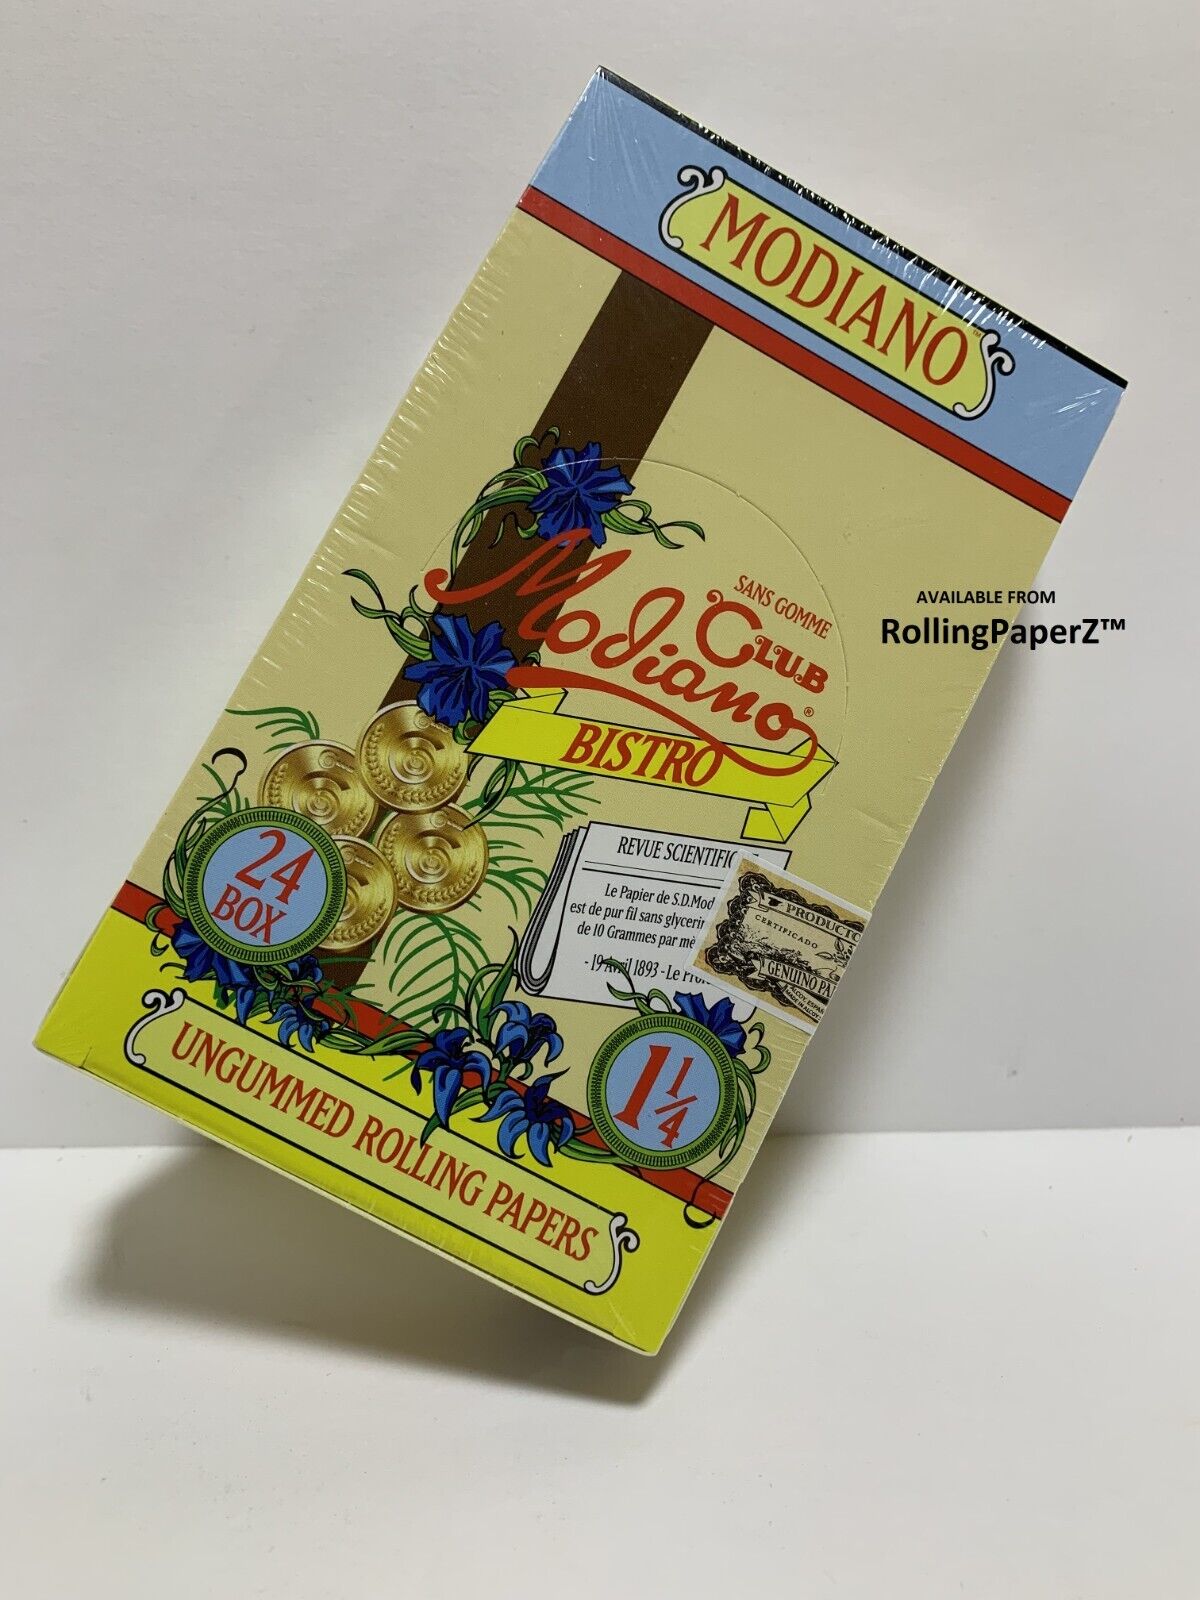 BOX CLUB MODIANO BISTRO ROLLING PAPERS 1 1/4 SIZE UNGUMMED 24 PKS/ 32 LEAVES EA